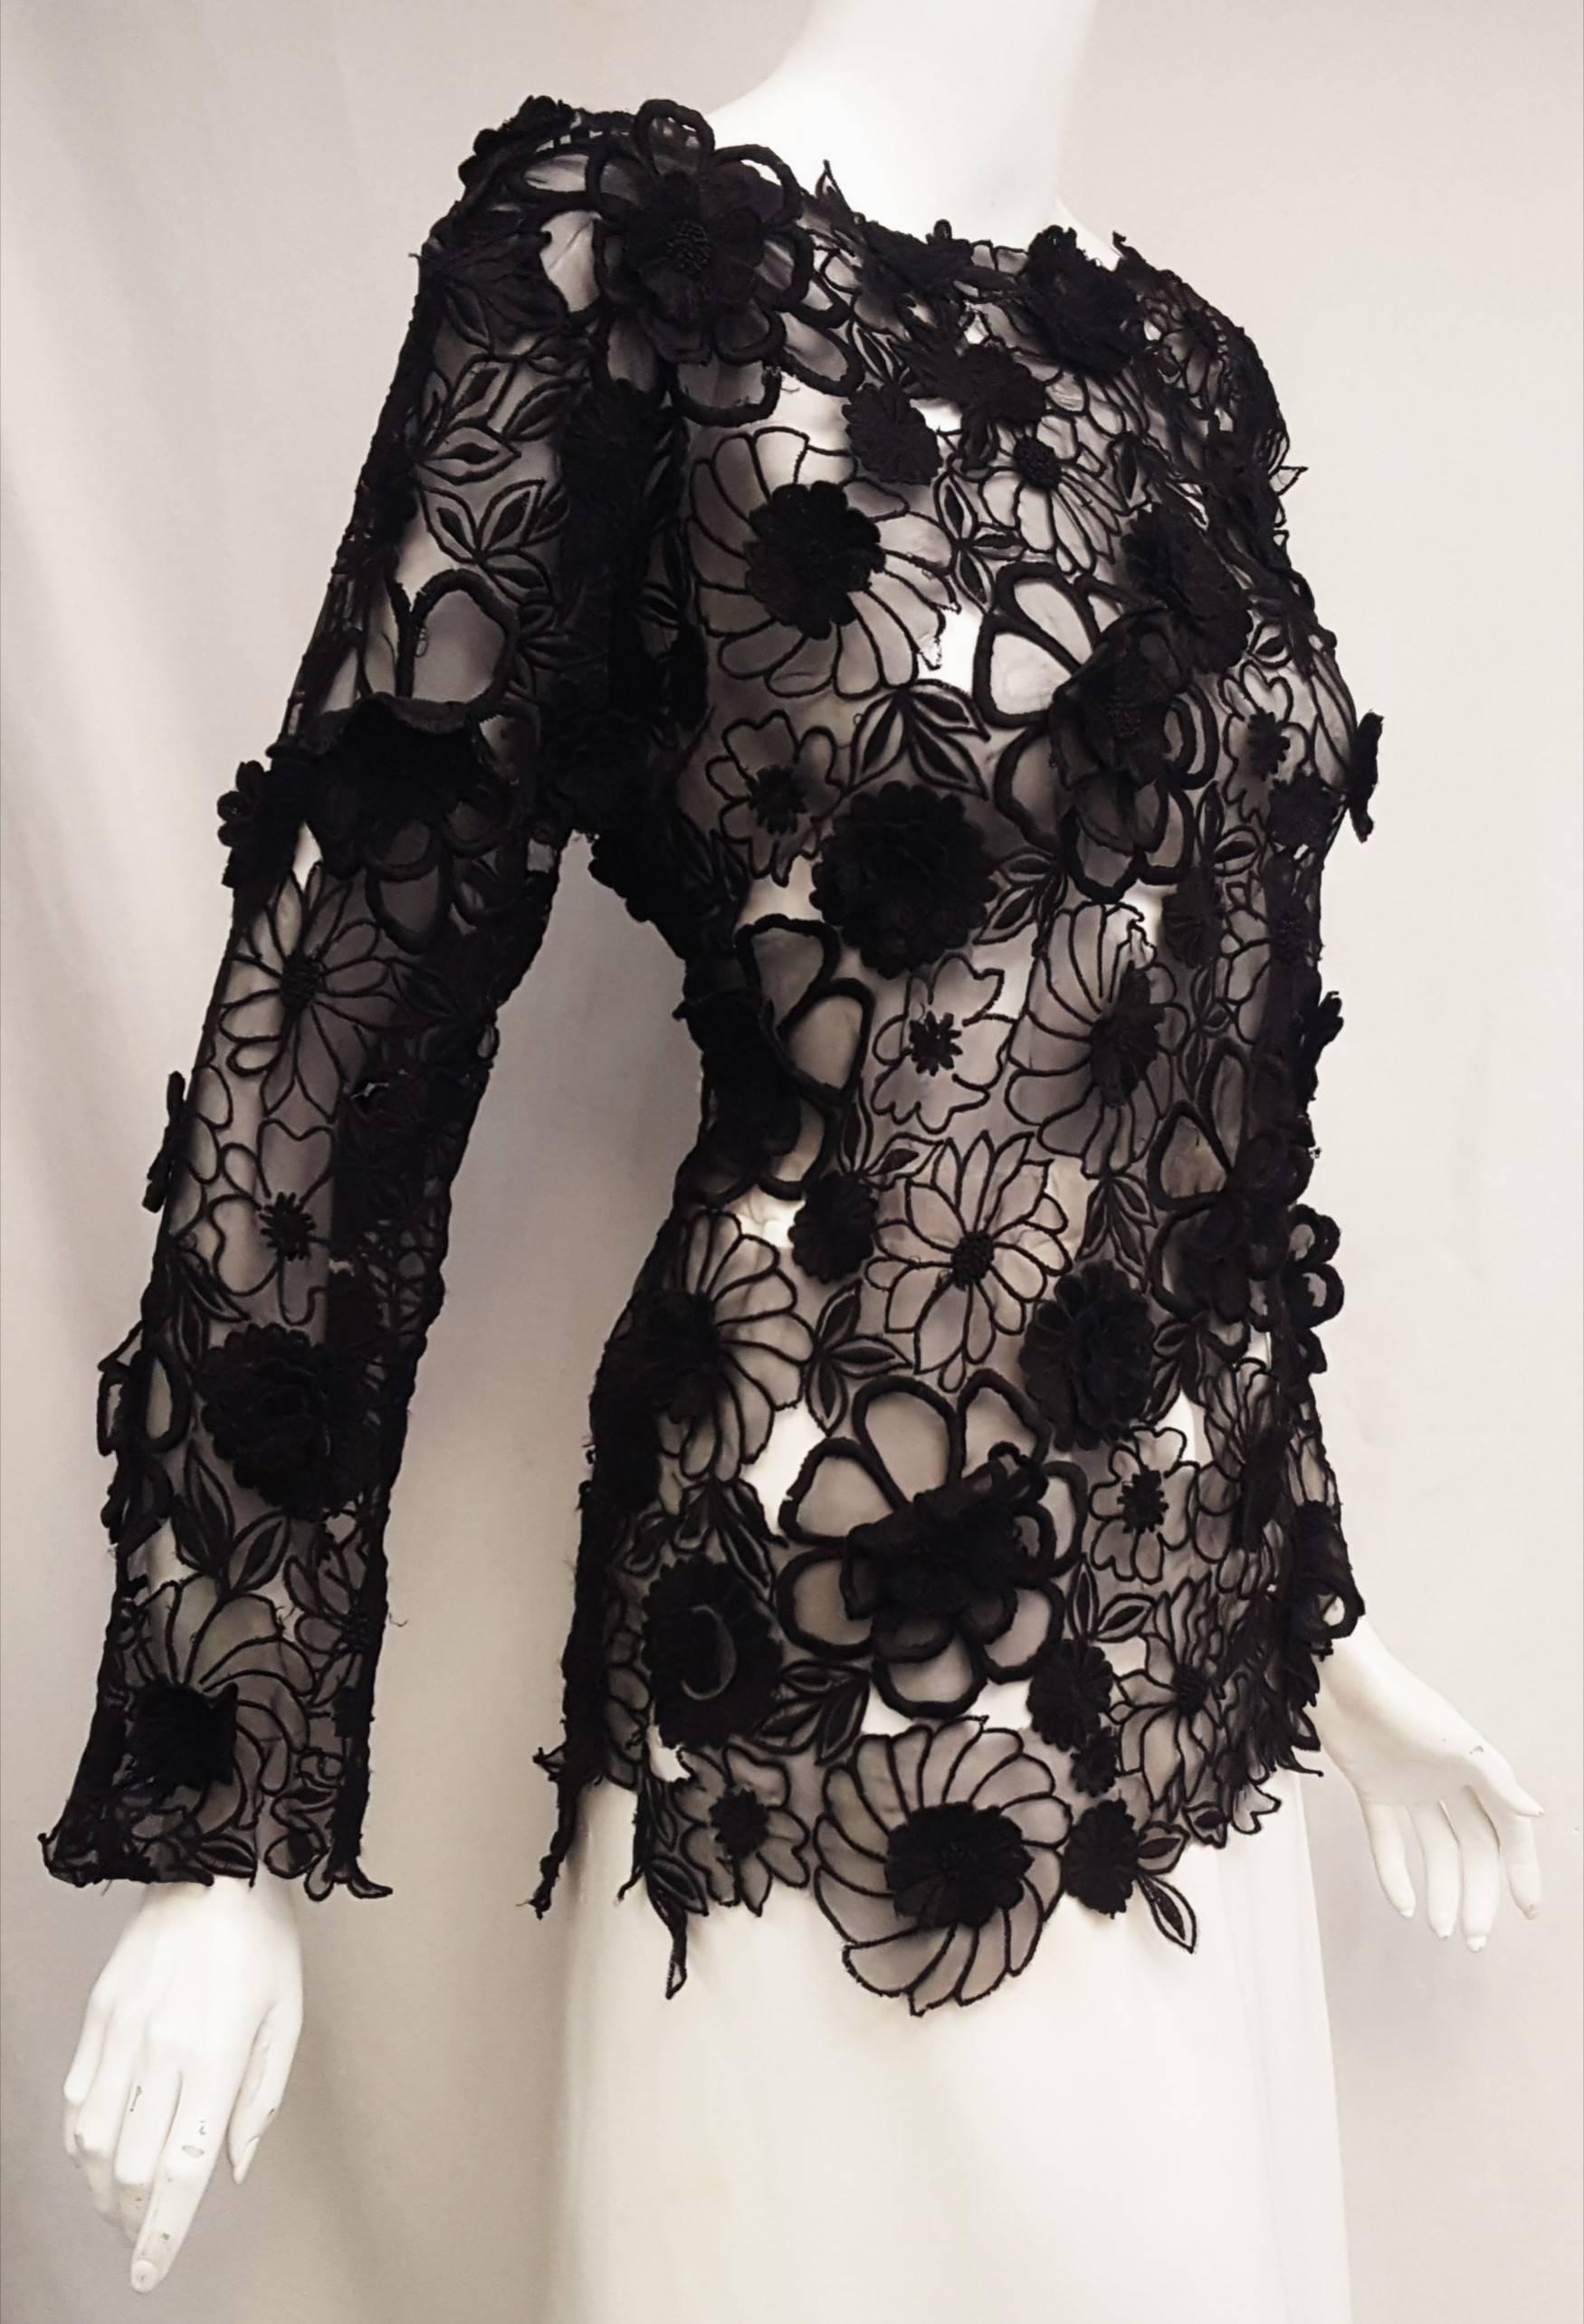 Dries Van Noten black floral applique on transparent silk fabric showcases the classic and the trendy in this feminine top that can be worn with jeans or silk palazzo slacks. With a bateau neckline and scalloped edges on the hem and long sleeves